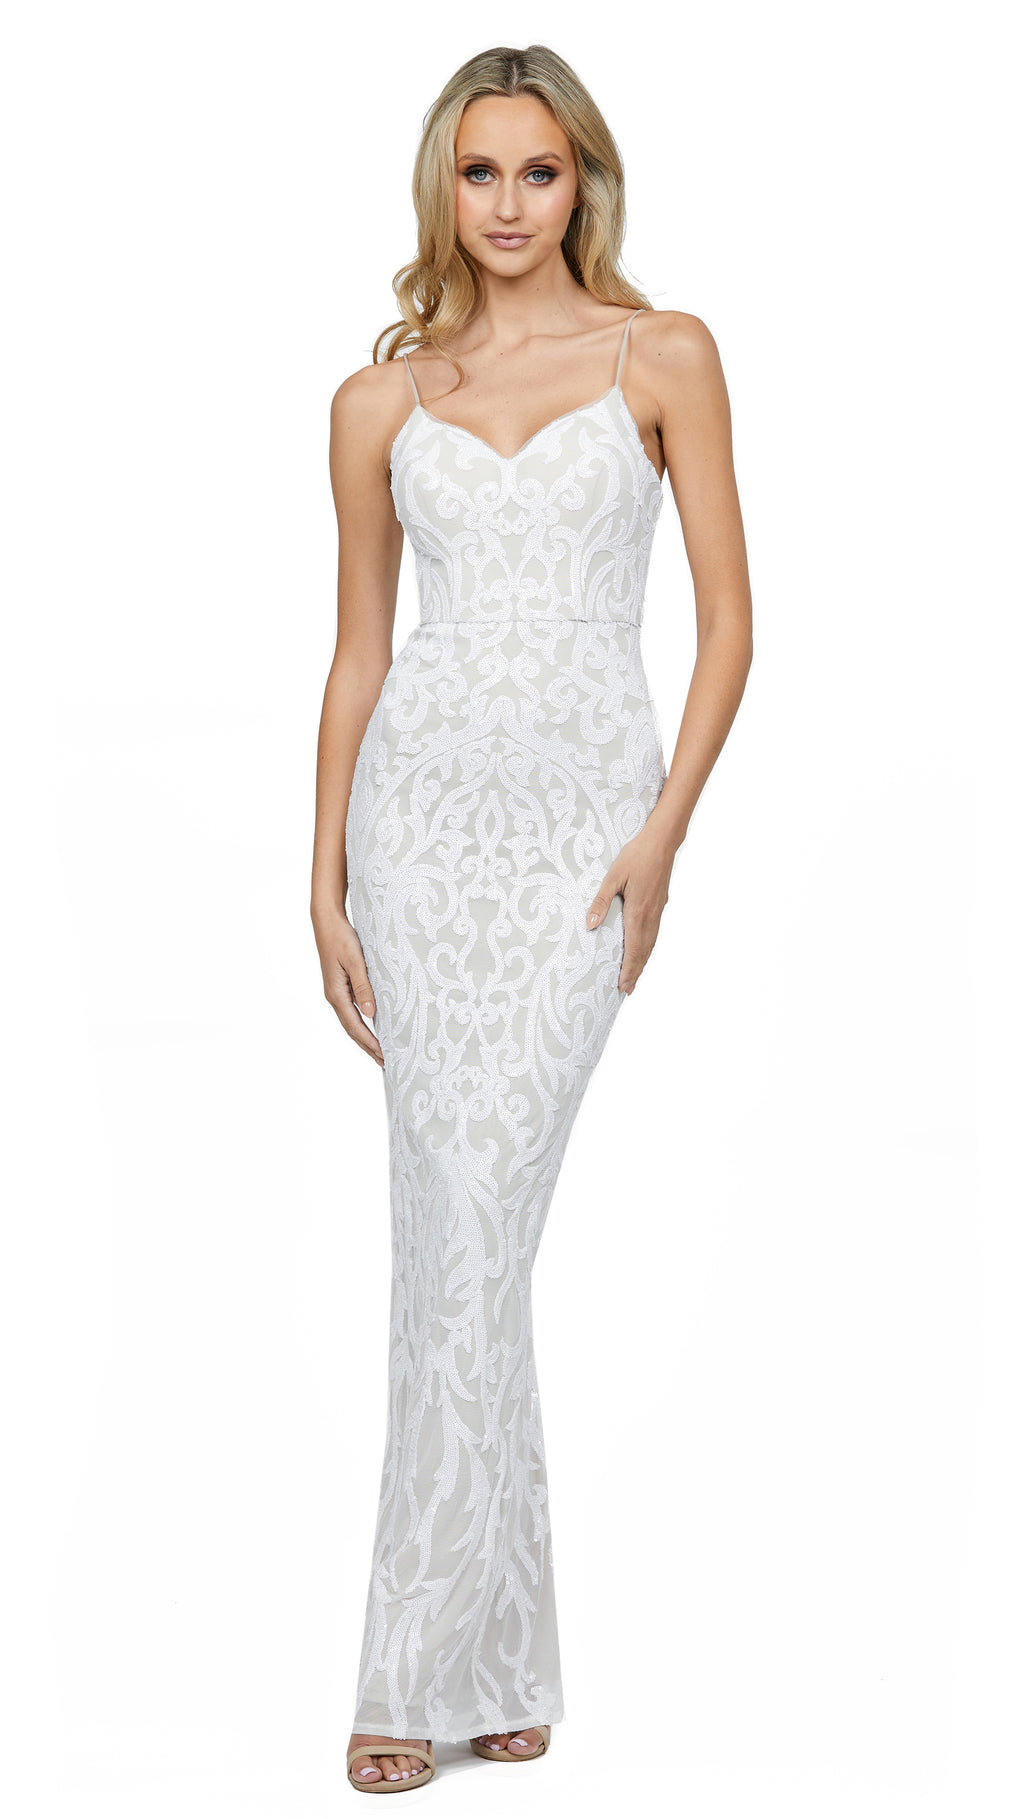 Sherlie V Neck Gown in White/Nude